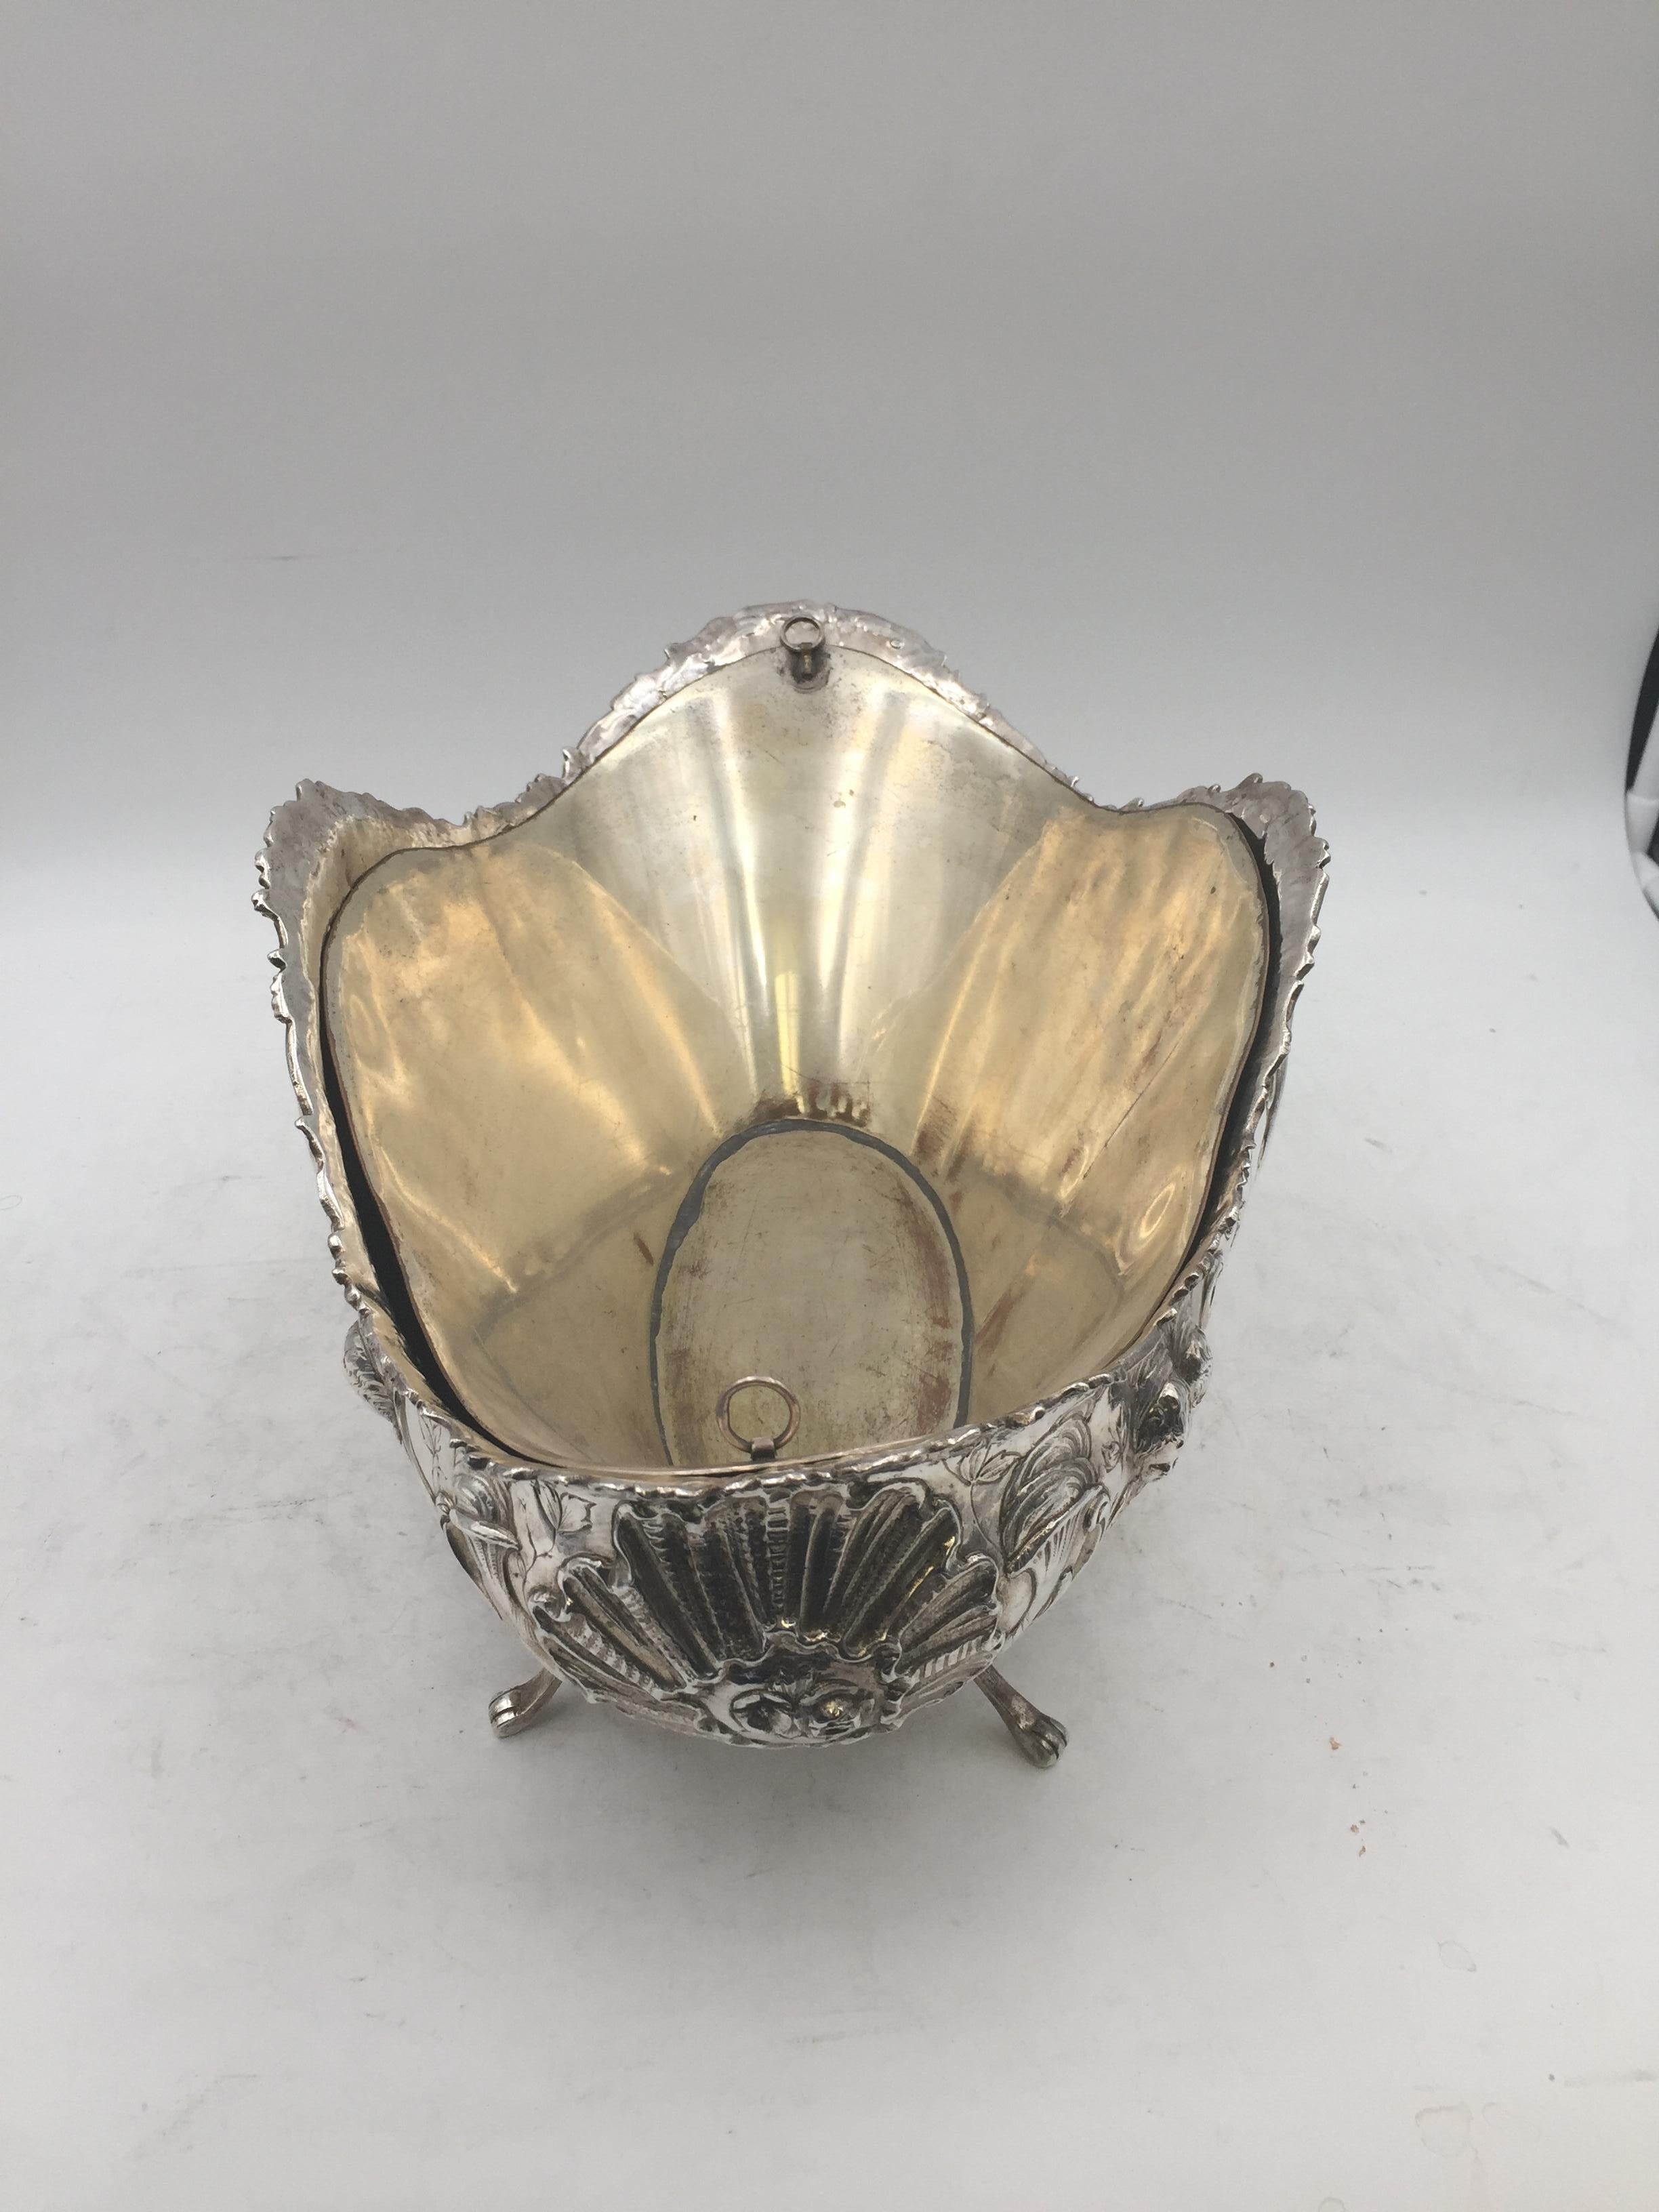 Continental silver repousse bowl, circa 1900. The center of the bowl has a beautiful cherub/putti scene. Rose swags and foliate scrolls to the inner pierced walls. Monogrammed and dated Oct. 19th, 1928. Weight is 40.3 ozt without insert. 8 in tall,